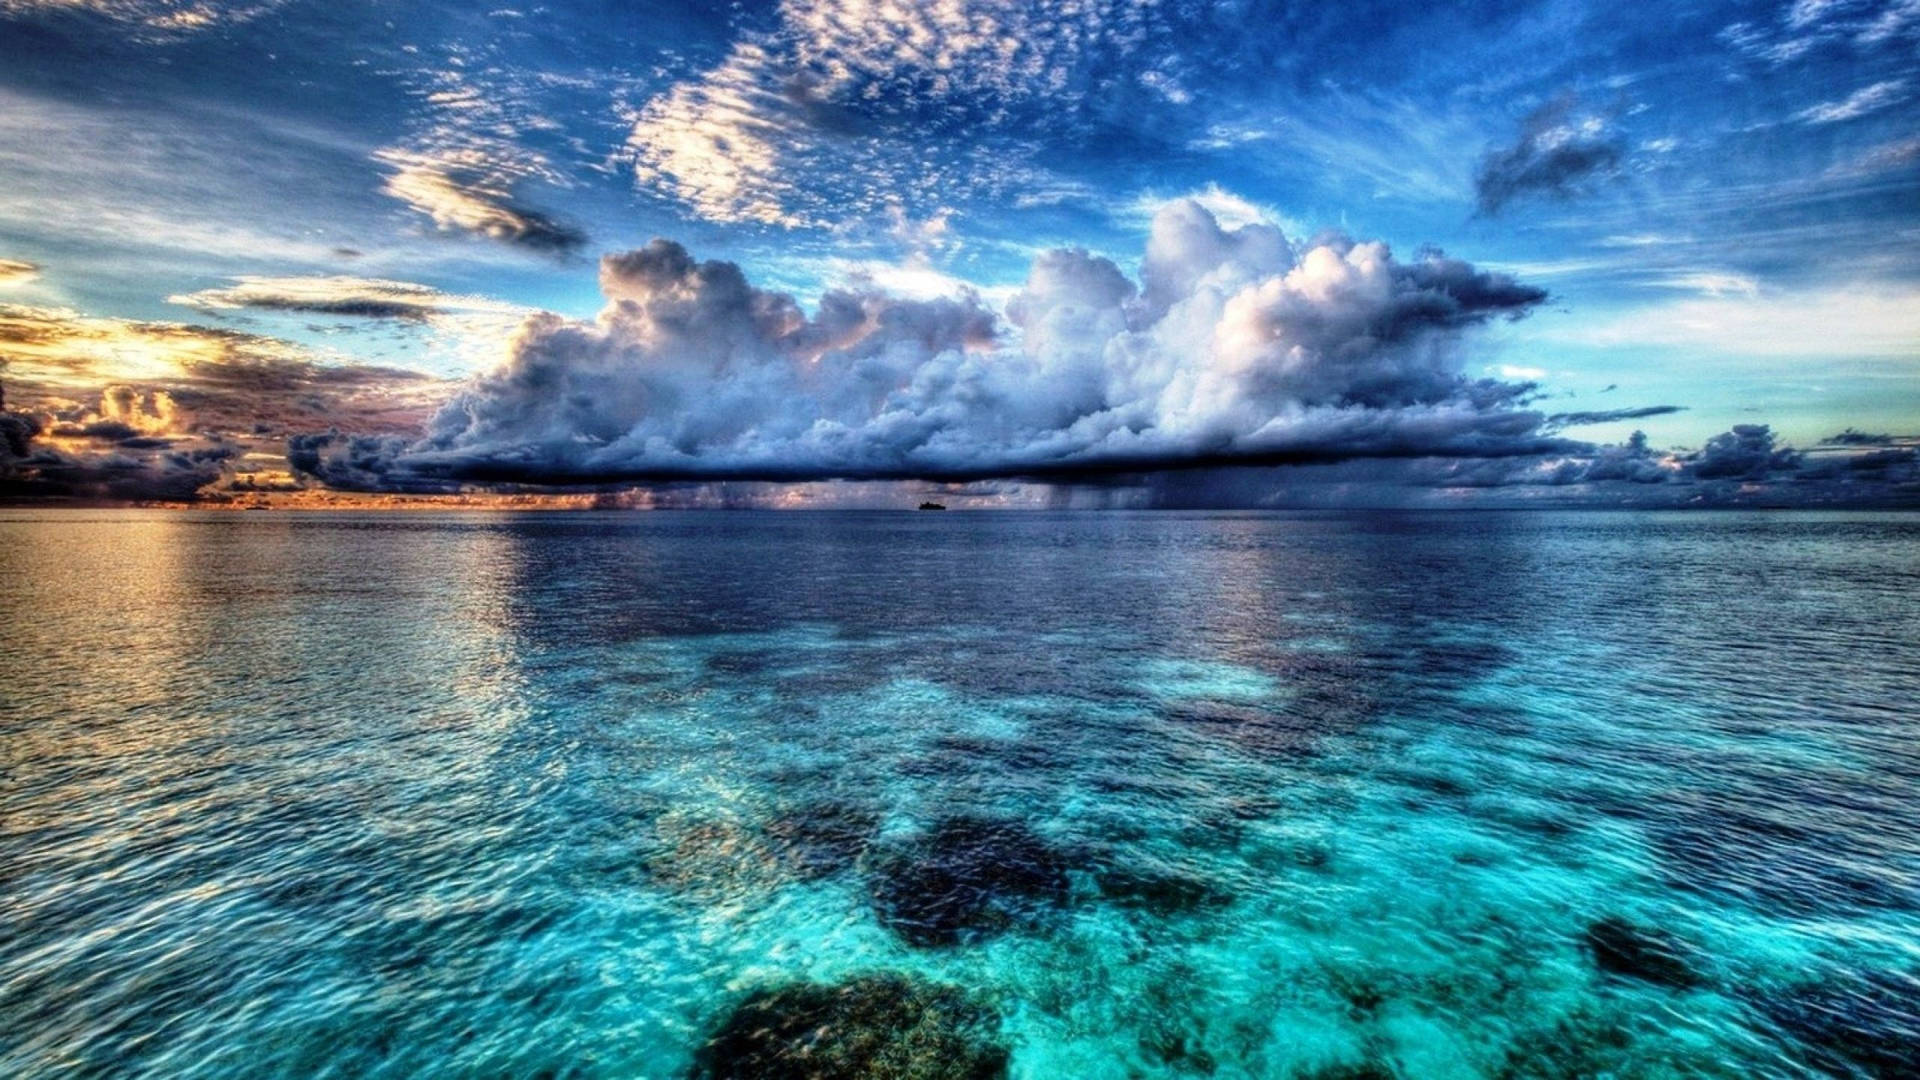 A Vast And Majestic Blue Ocean With Majestic Orange-tinged Clouds In The Sky. Wallpaper